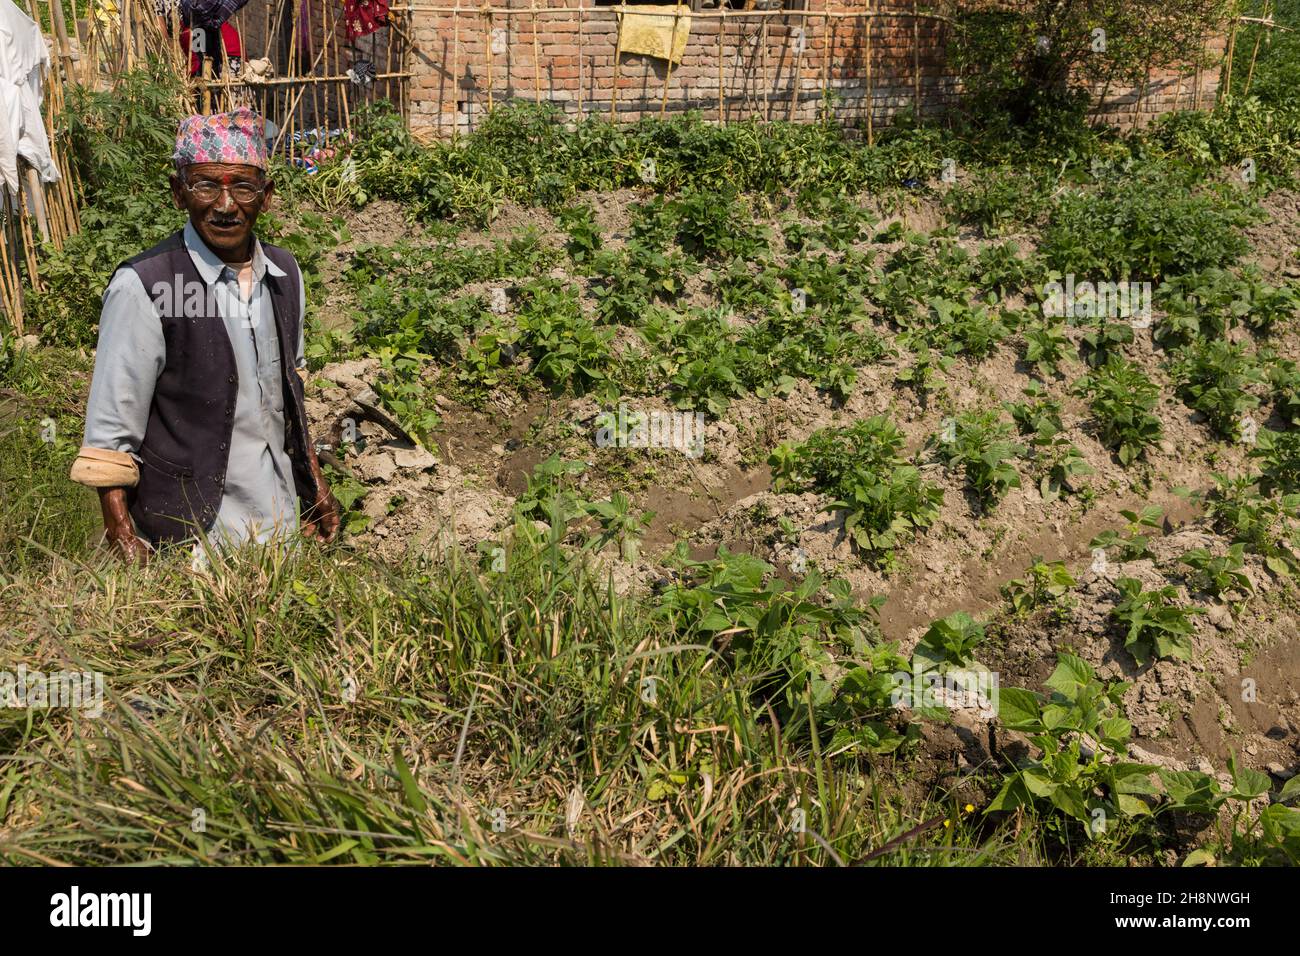 A Nepalese farmer wearing the traditional dhaka topi hat in his vegetable garden.  Bungamati, Nepal. Stock Photo